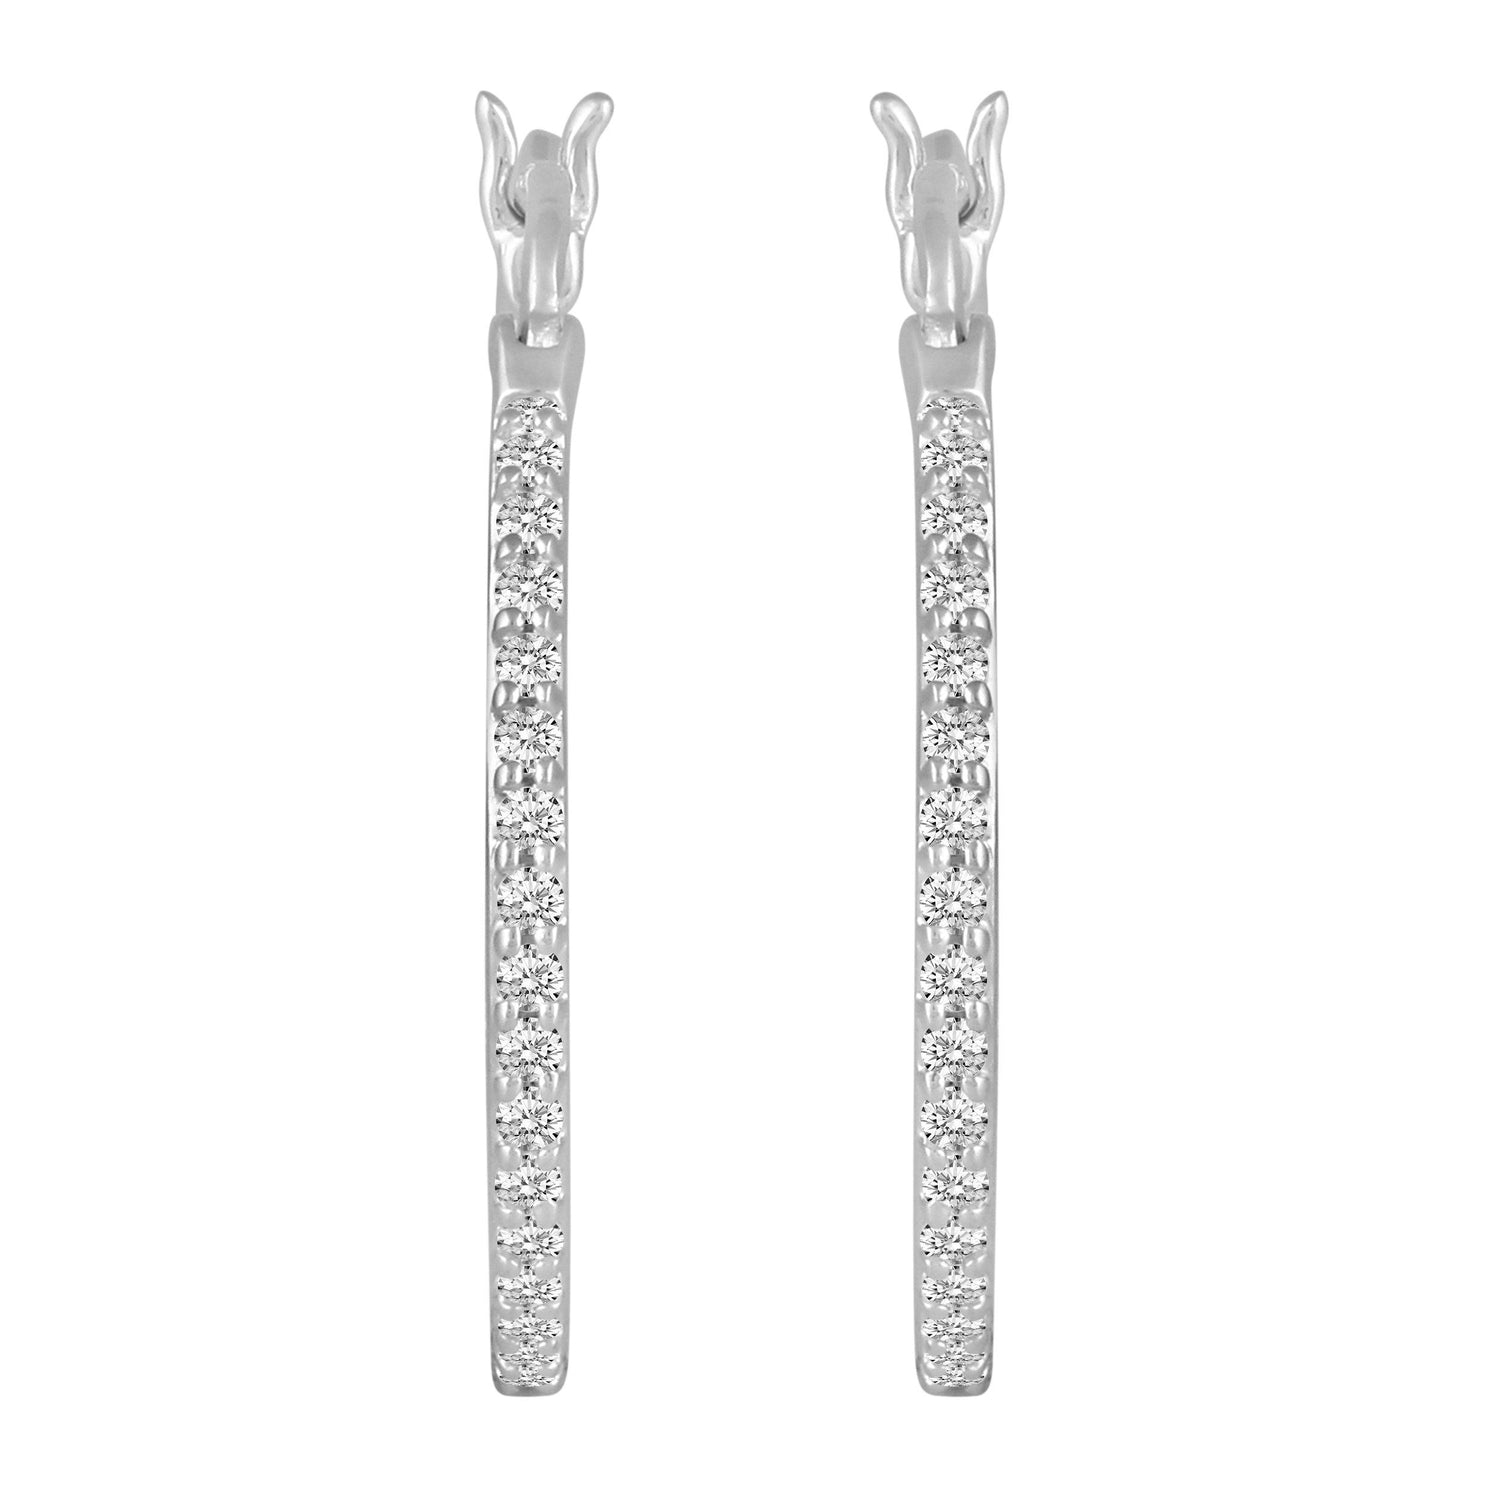 Diamond Hoop Earrings in Sterling Silver affordable cheap fine jewelry birthday gift 